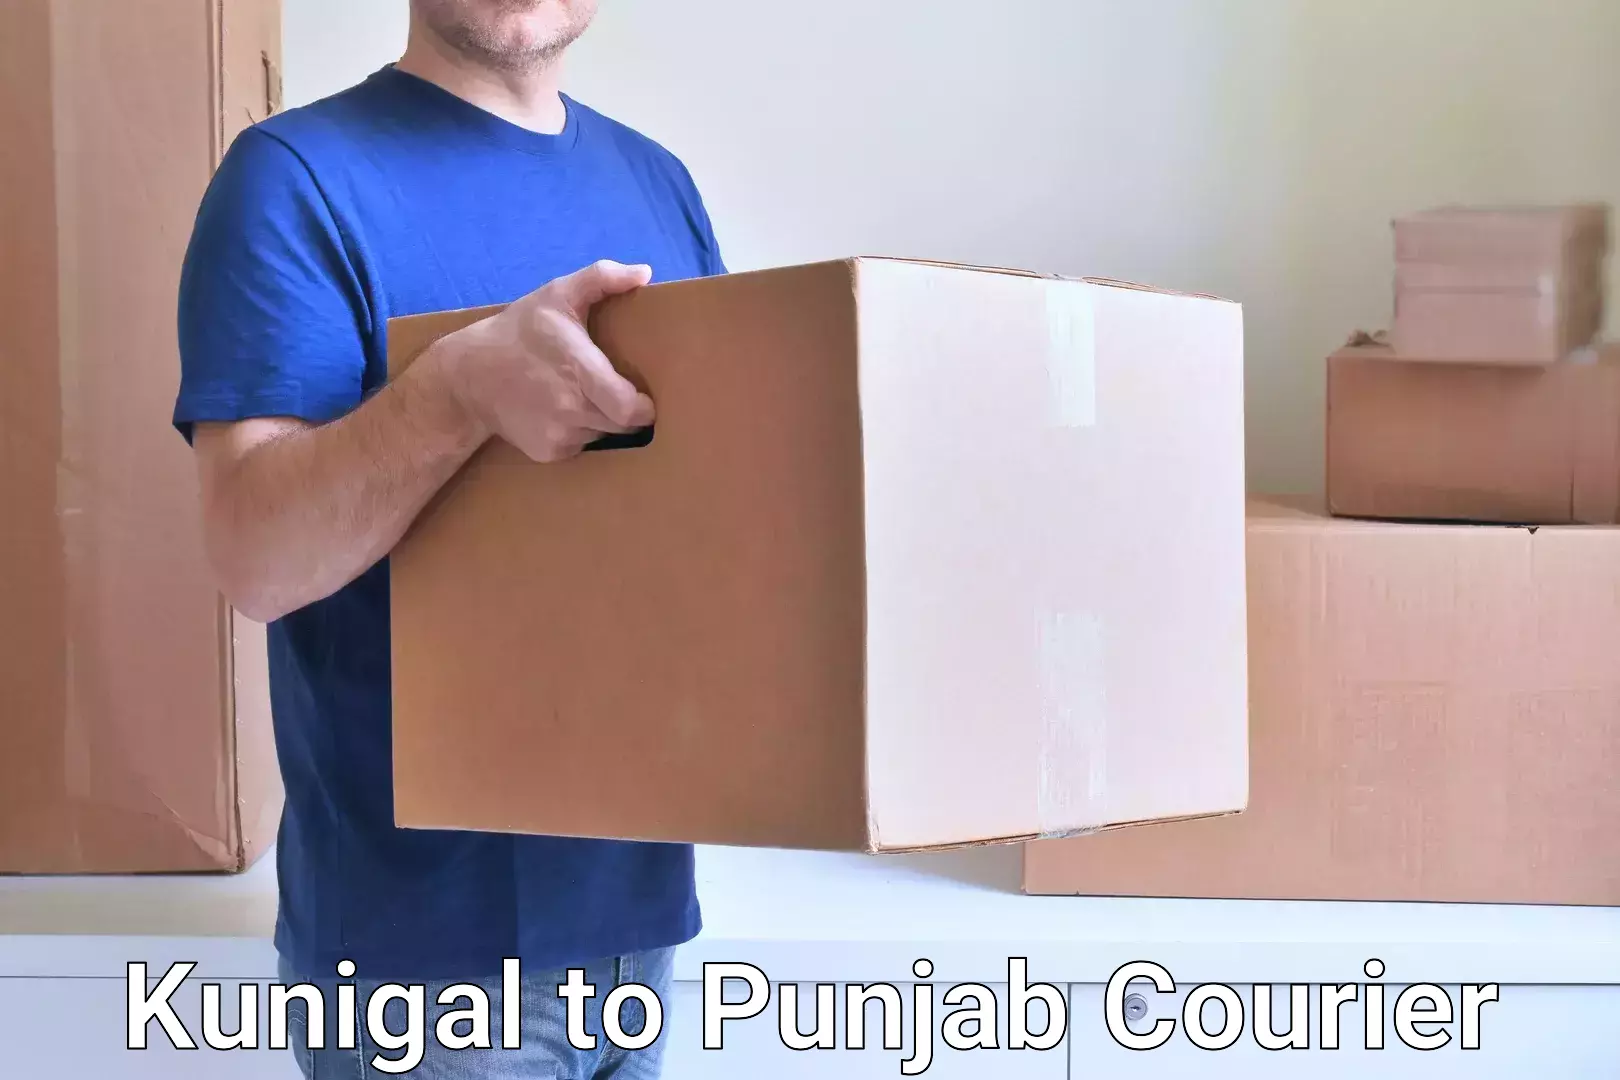 Comprehensive shipping network Kunigal to Amritsar